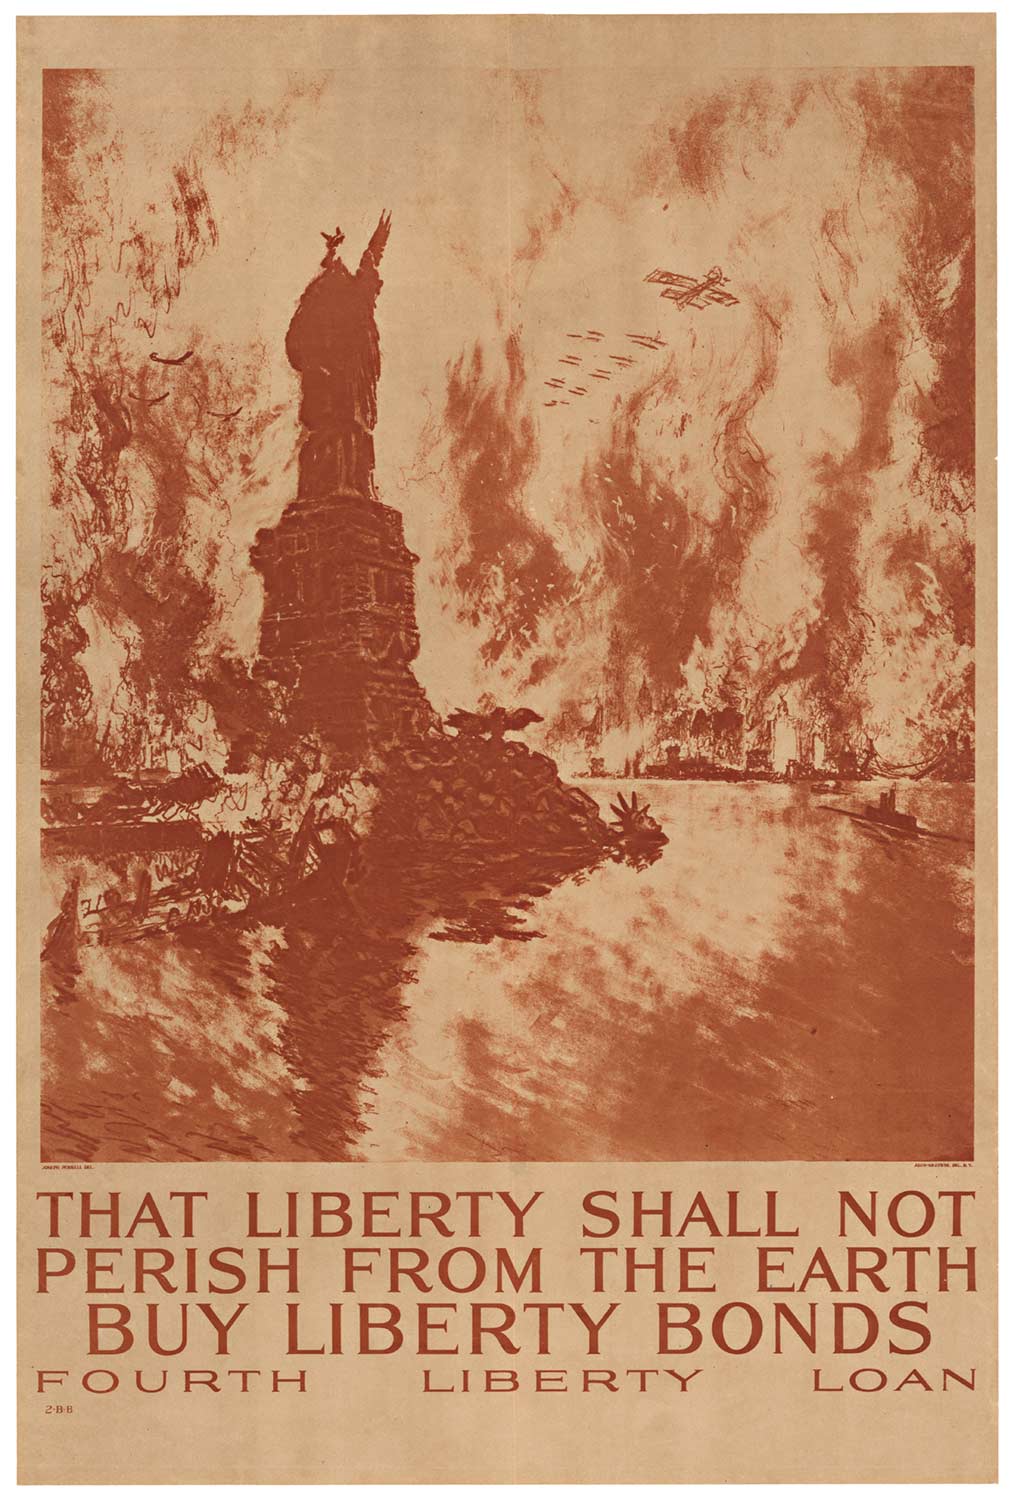 Linen backed original American World War One poster: That Liberty Shall Not Perish From the Earth -- Buy Liberty Bonds. America on fire; the Statue of Liberty in ruins; New York City destroyed. The powerful visual images created for these world war 1